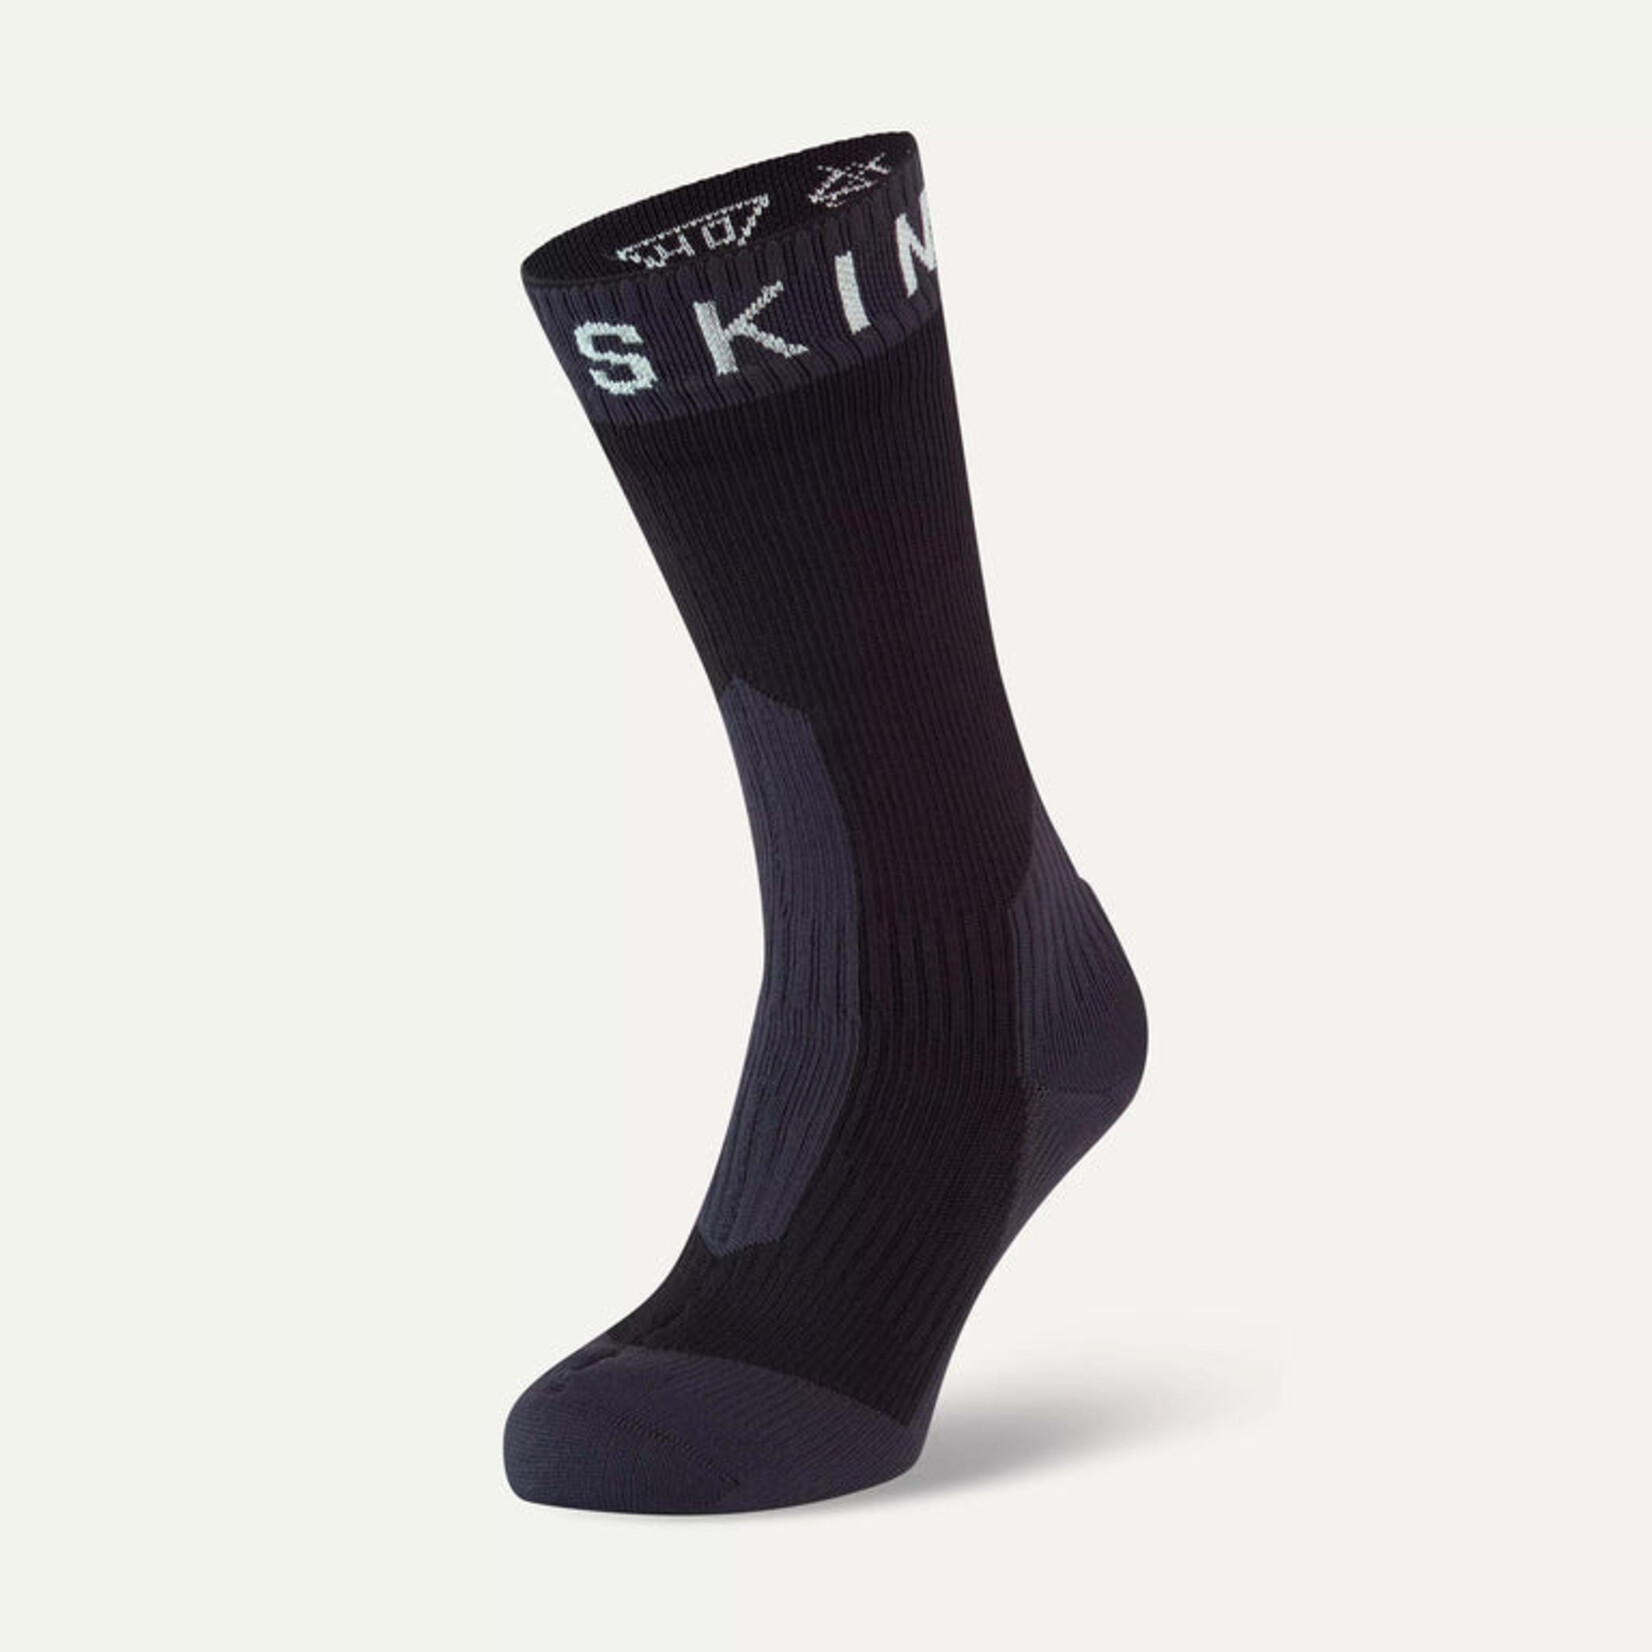 SealSkinz SealSkinz STANFIELD Waterproof Extreme Cold Weather Mid Length Sock